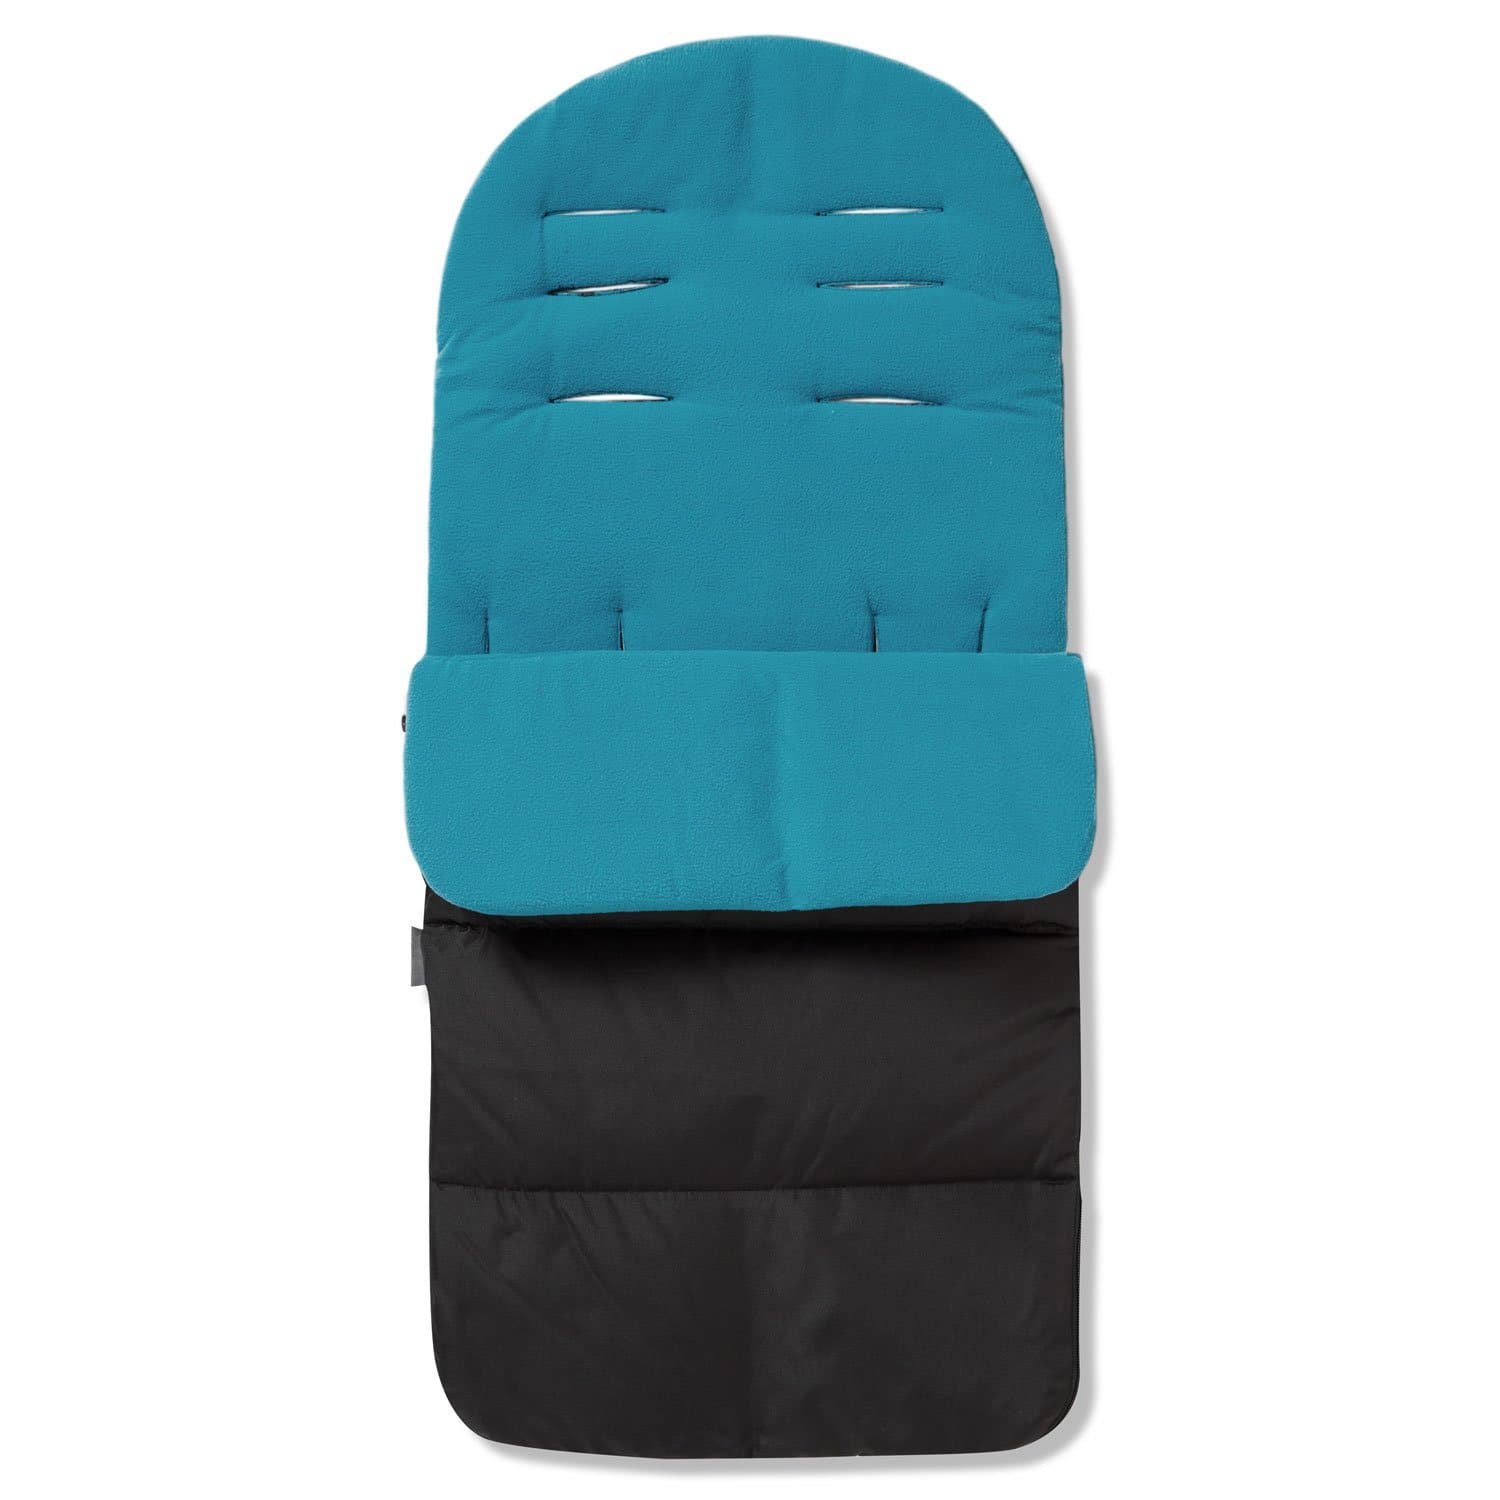 Premium Footmuff / Cosy Toes Compatible with Bebecar - Ocean Blue / Fits All Models | For Your Little One